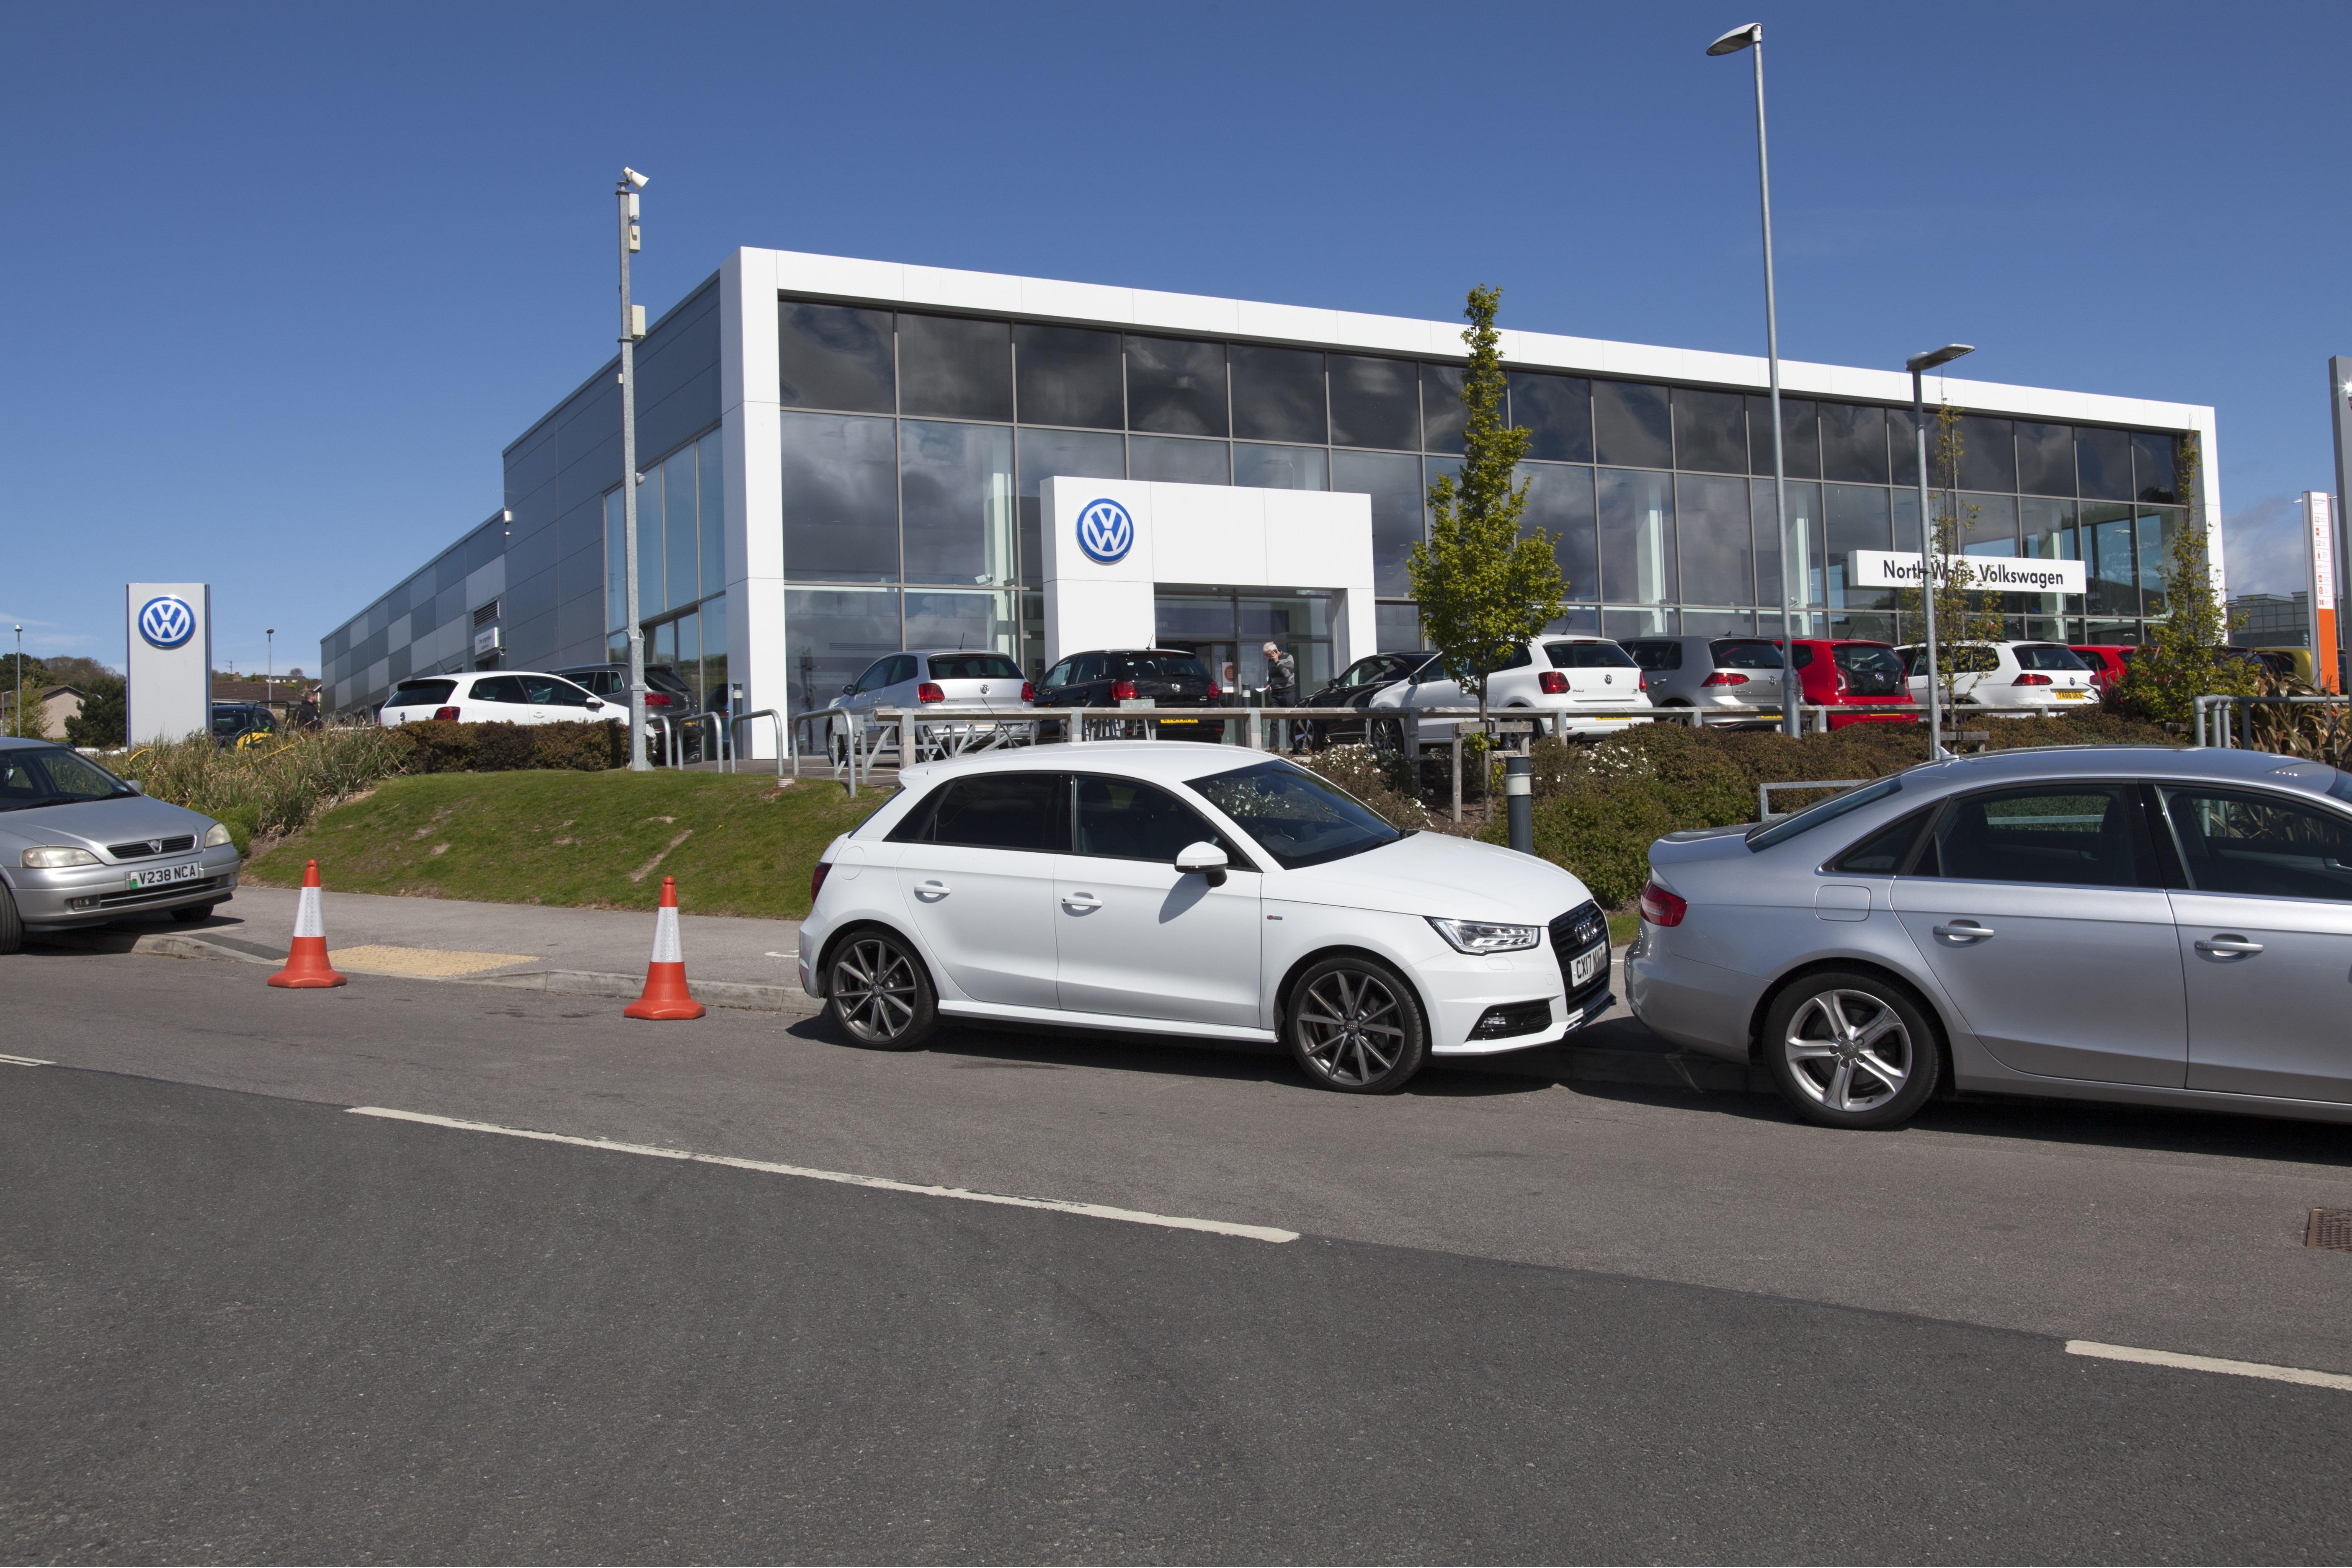 Images North Wales Volkswagen Cars and Van Centre